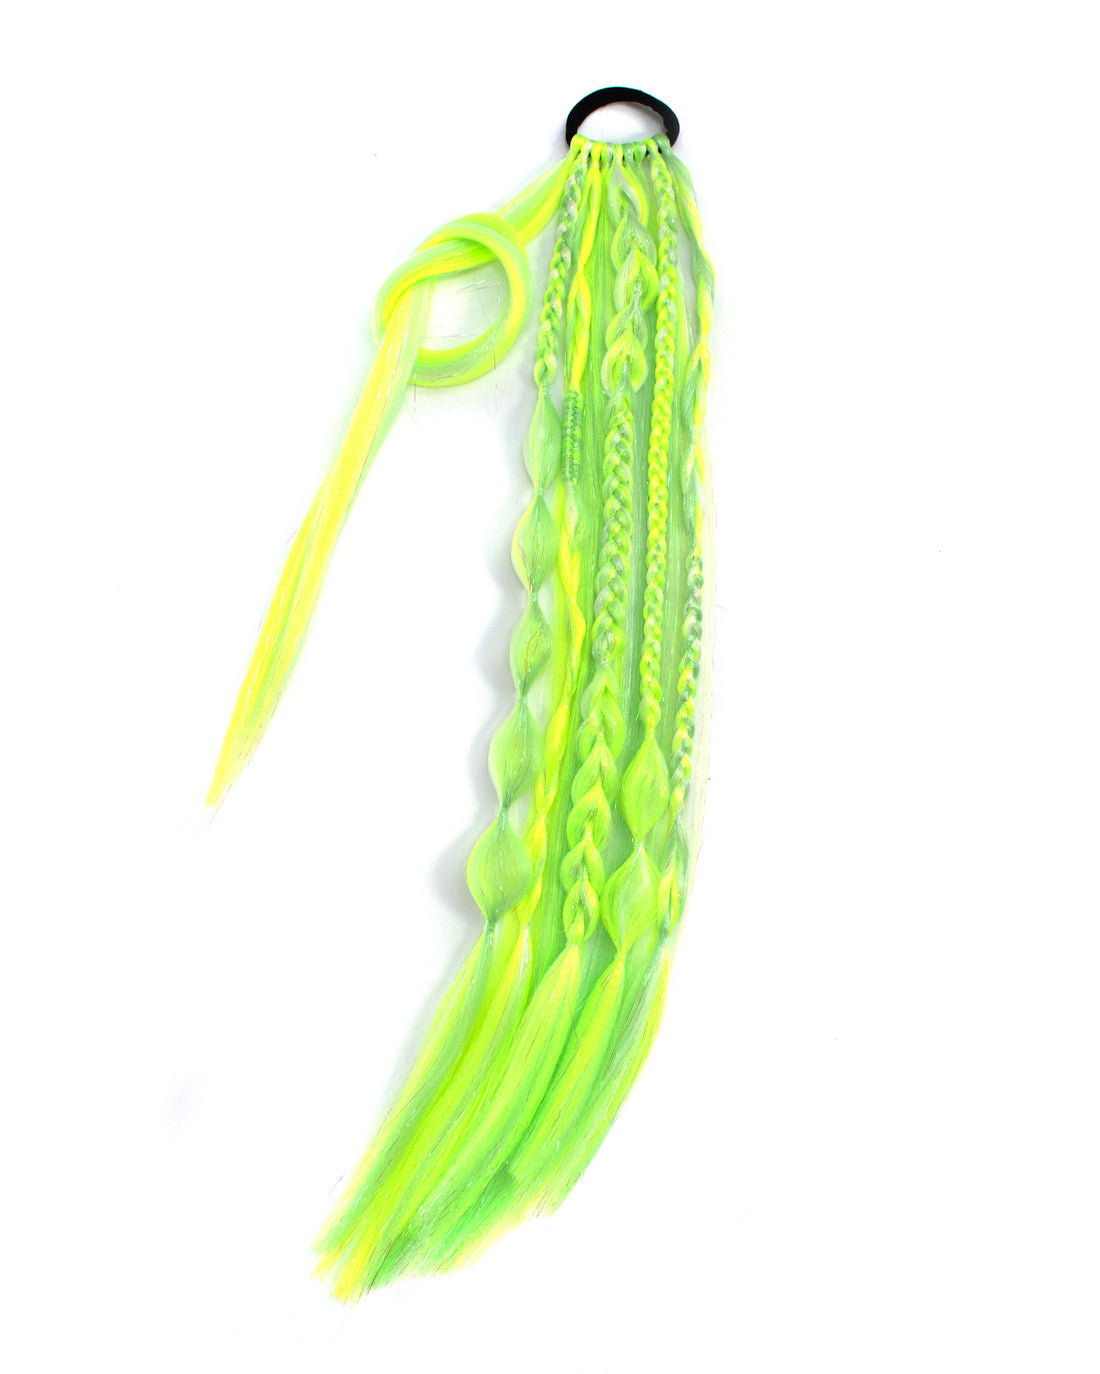 Firefly - Neon Green Braided UV-Reactive Ponytail Extension - Lunautics Ponytail Hair Extension